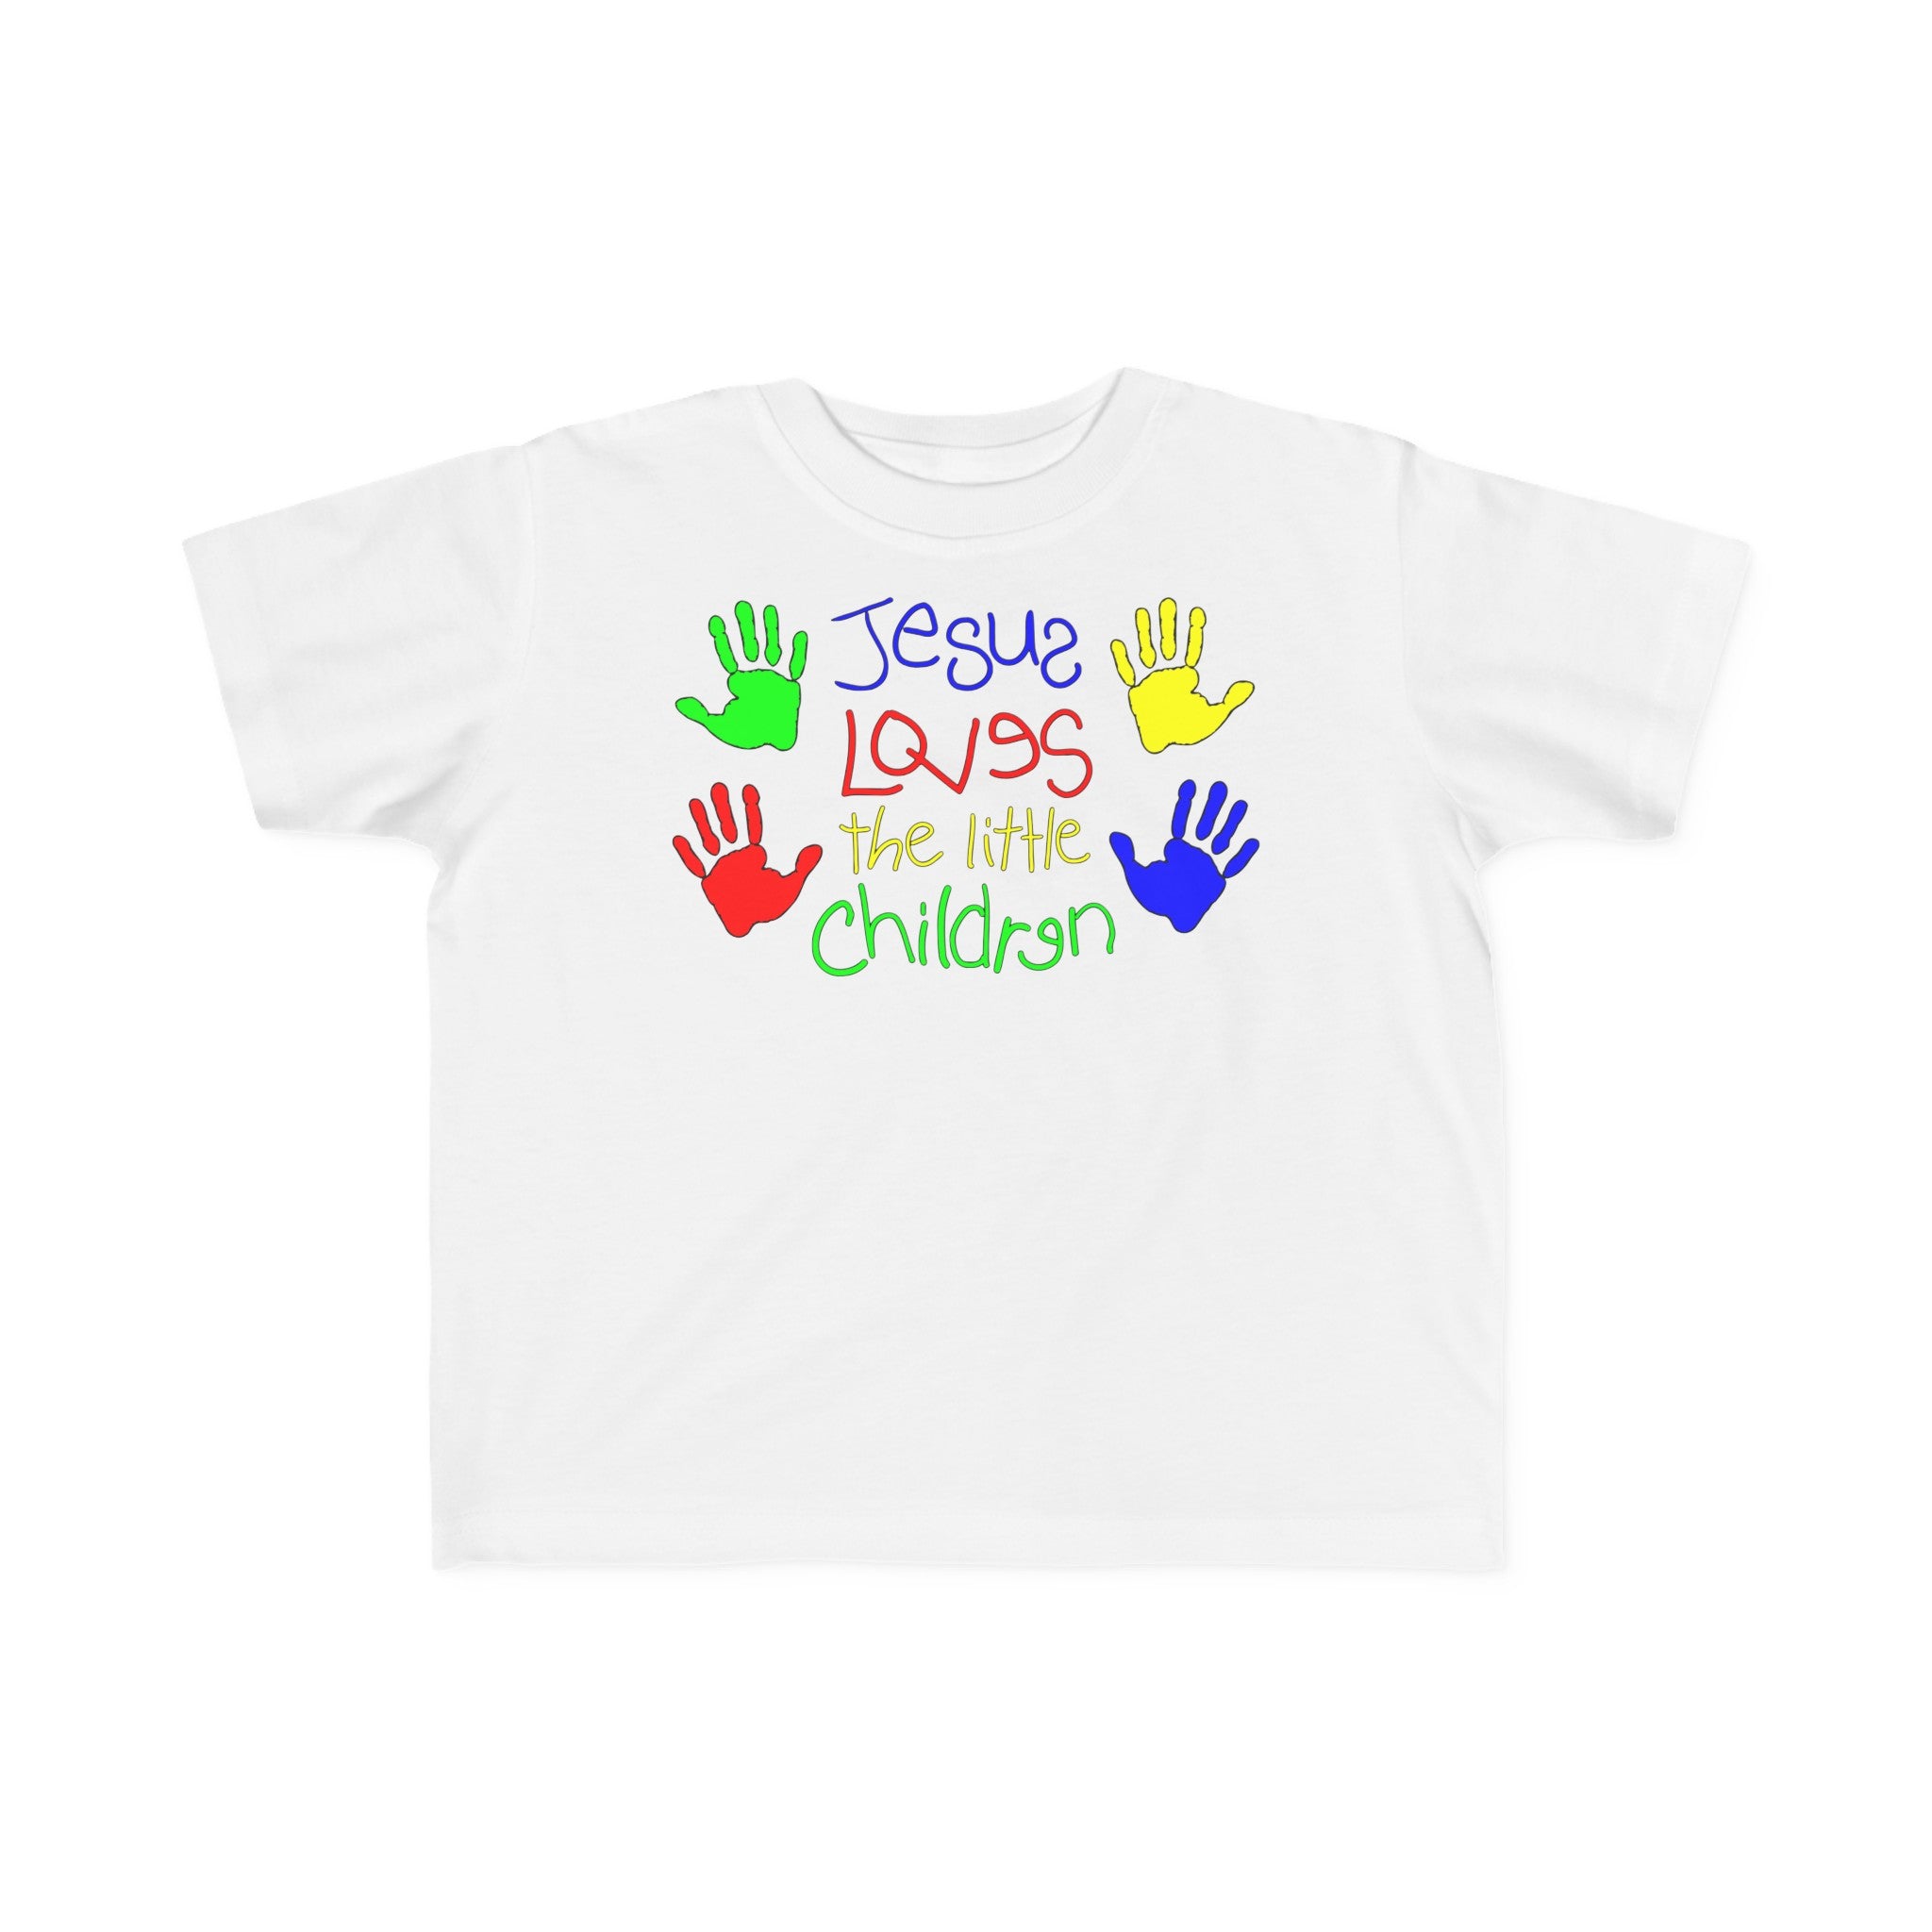 Jesus Loves the Little Children Toddler's Fine Jersey Tee Color: White Size: 2T Jesus Passion Apparel